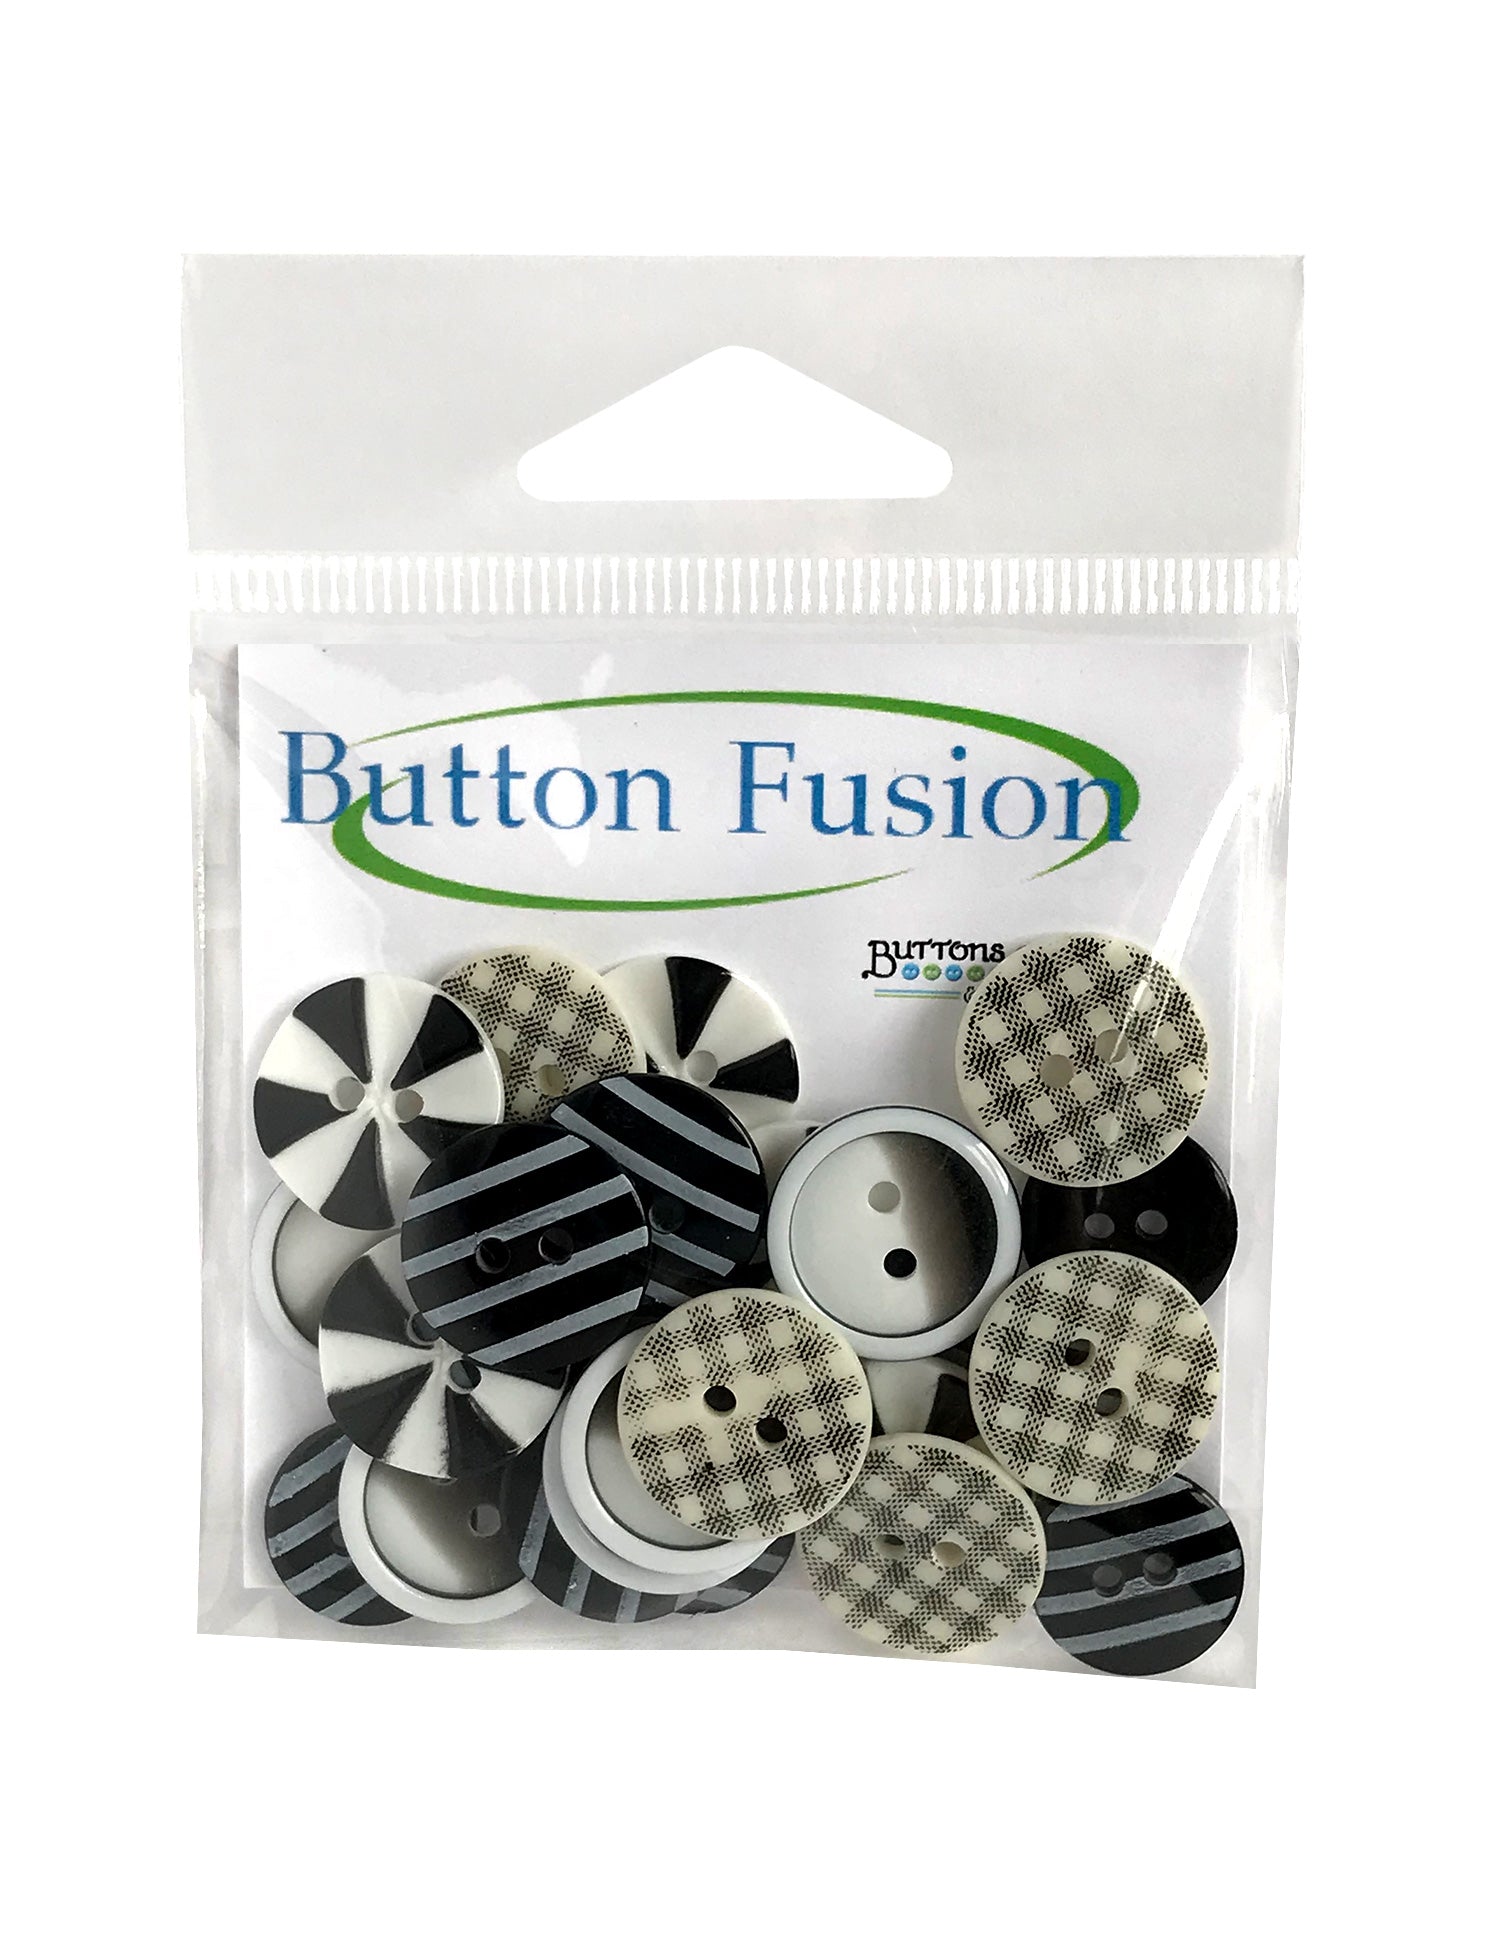 Optical Illusion - Buttons Galore and More